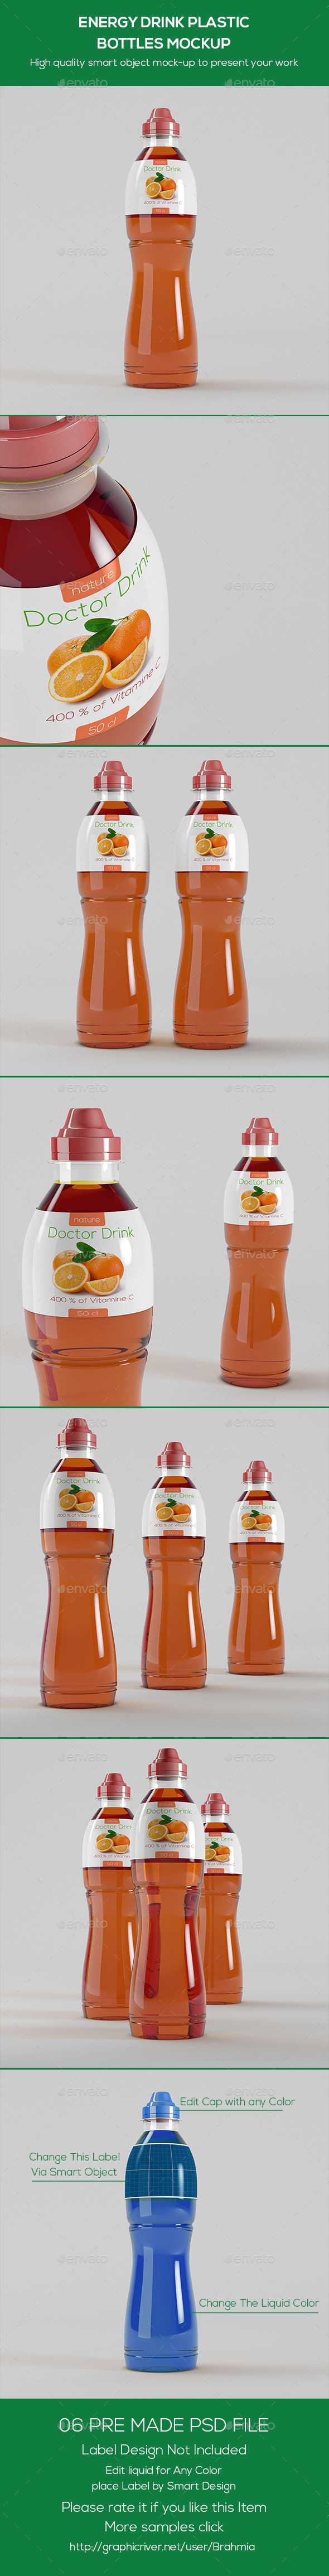 Download Energy Drink Plastic Bottles Mockup by Brahmia | GraphicRiver